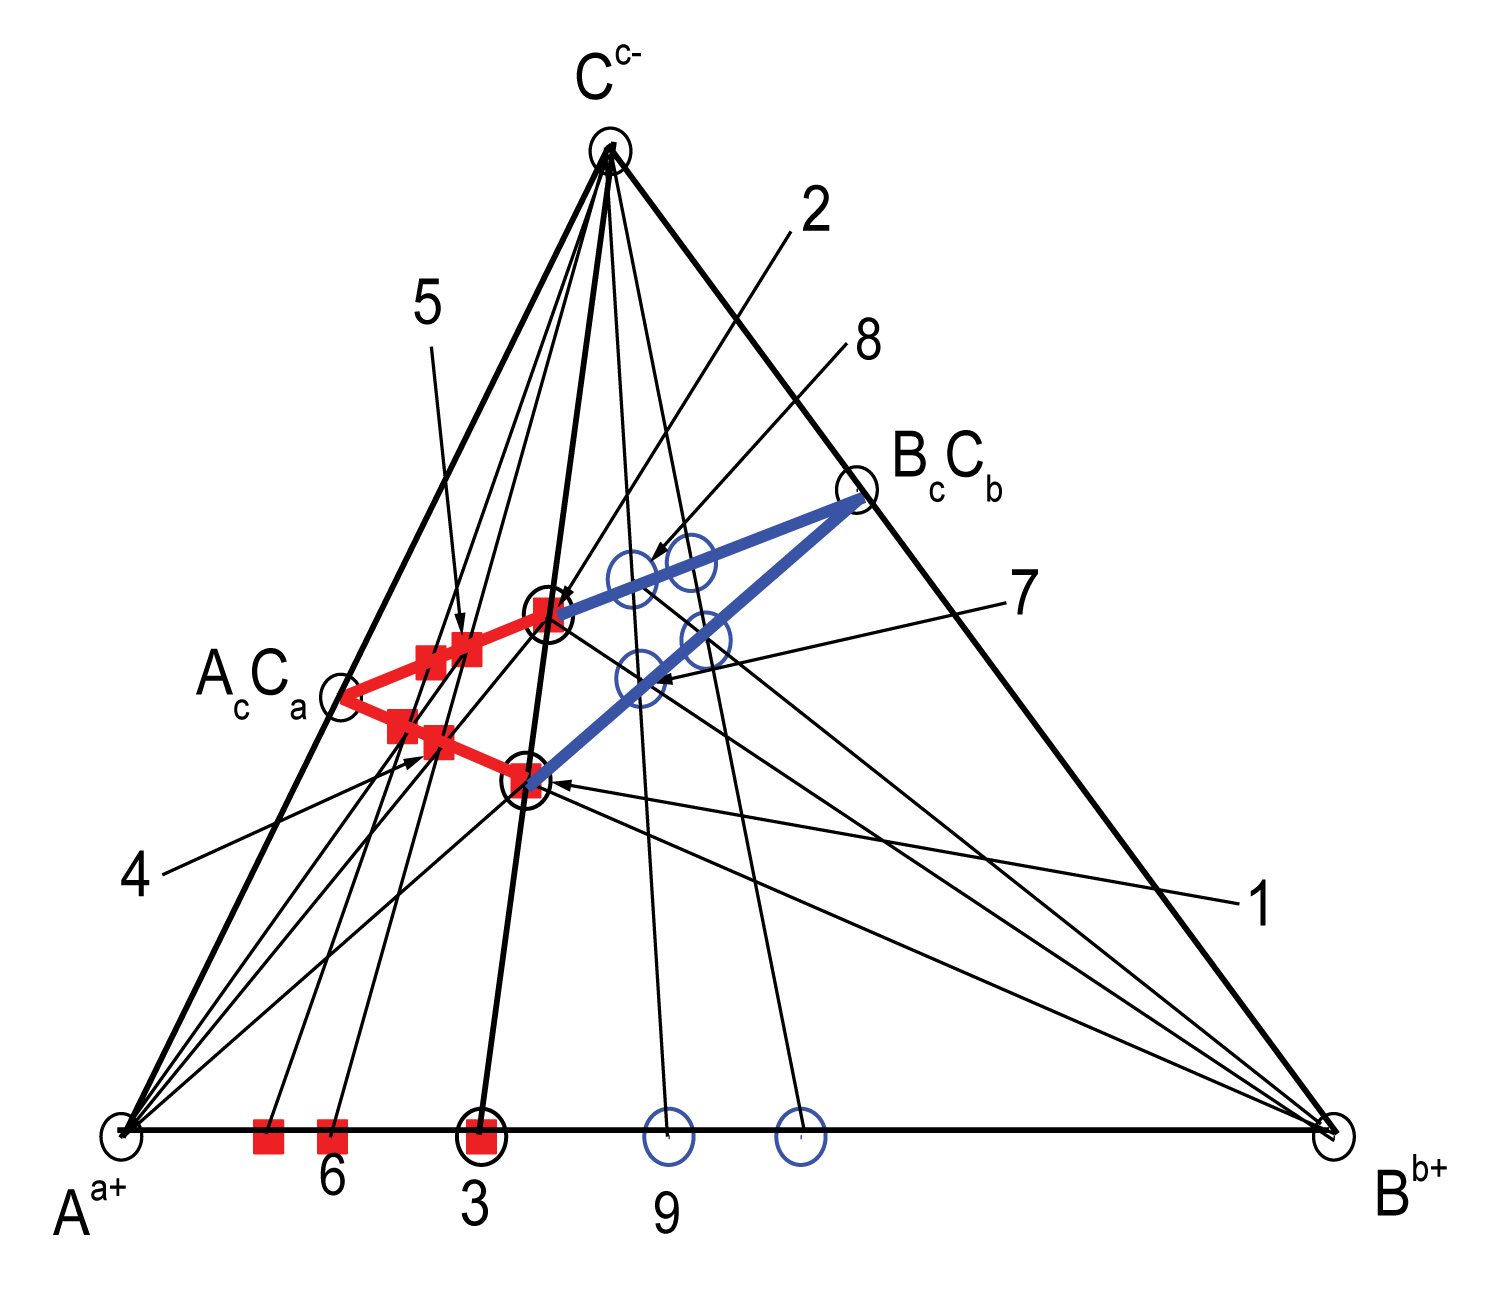 System (Aa+ – Bb+ – Cc–): αp-HS (AcCa direction) and αm-HS (BcCb direction).  αp-HS: (p. 1 = TChCln(bas) = 1 = [AbcBacCab]abc+), (p. 2 = TCCn(bas) = 1 = AbcBacC2ab) (p. 3 = TwChCln(bas) = 1 = [AbcBac]2abc+), (p. 4 = TChCln = 2 = [A2bcBacC2ab]abc+), (p. 5 = TCCn = 2 = A2bcBacC3ab, (p. 6 = TwChCln = 2 = [A2bcBac]3abc+);  αm-HS: (p. 1 = TChCln(bas) = 1 = [AbcBacCab]abc+), (p. 2 = TCCn(bas) = 1 = AbcBacC2ab), (p. 3 = TwChCln(bas) = 1 = [AbcBac]2abc+), (p. 7 = TChCln = 2 = [AbcB2acC2ab]abc+), (p. 8 = TCCn = 2 = AbcB2acC3ab, (p. 9 = TwChCln = 2 = [AbcB2ac]3abc+).